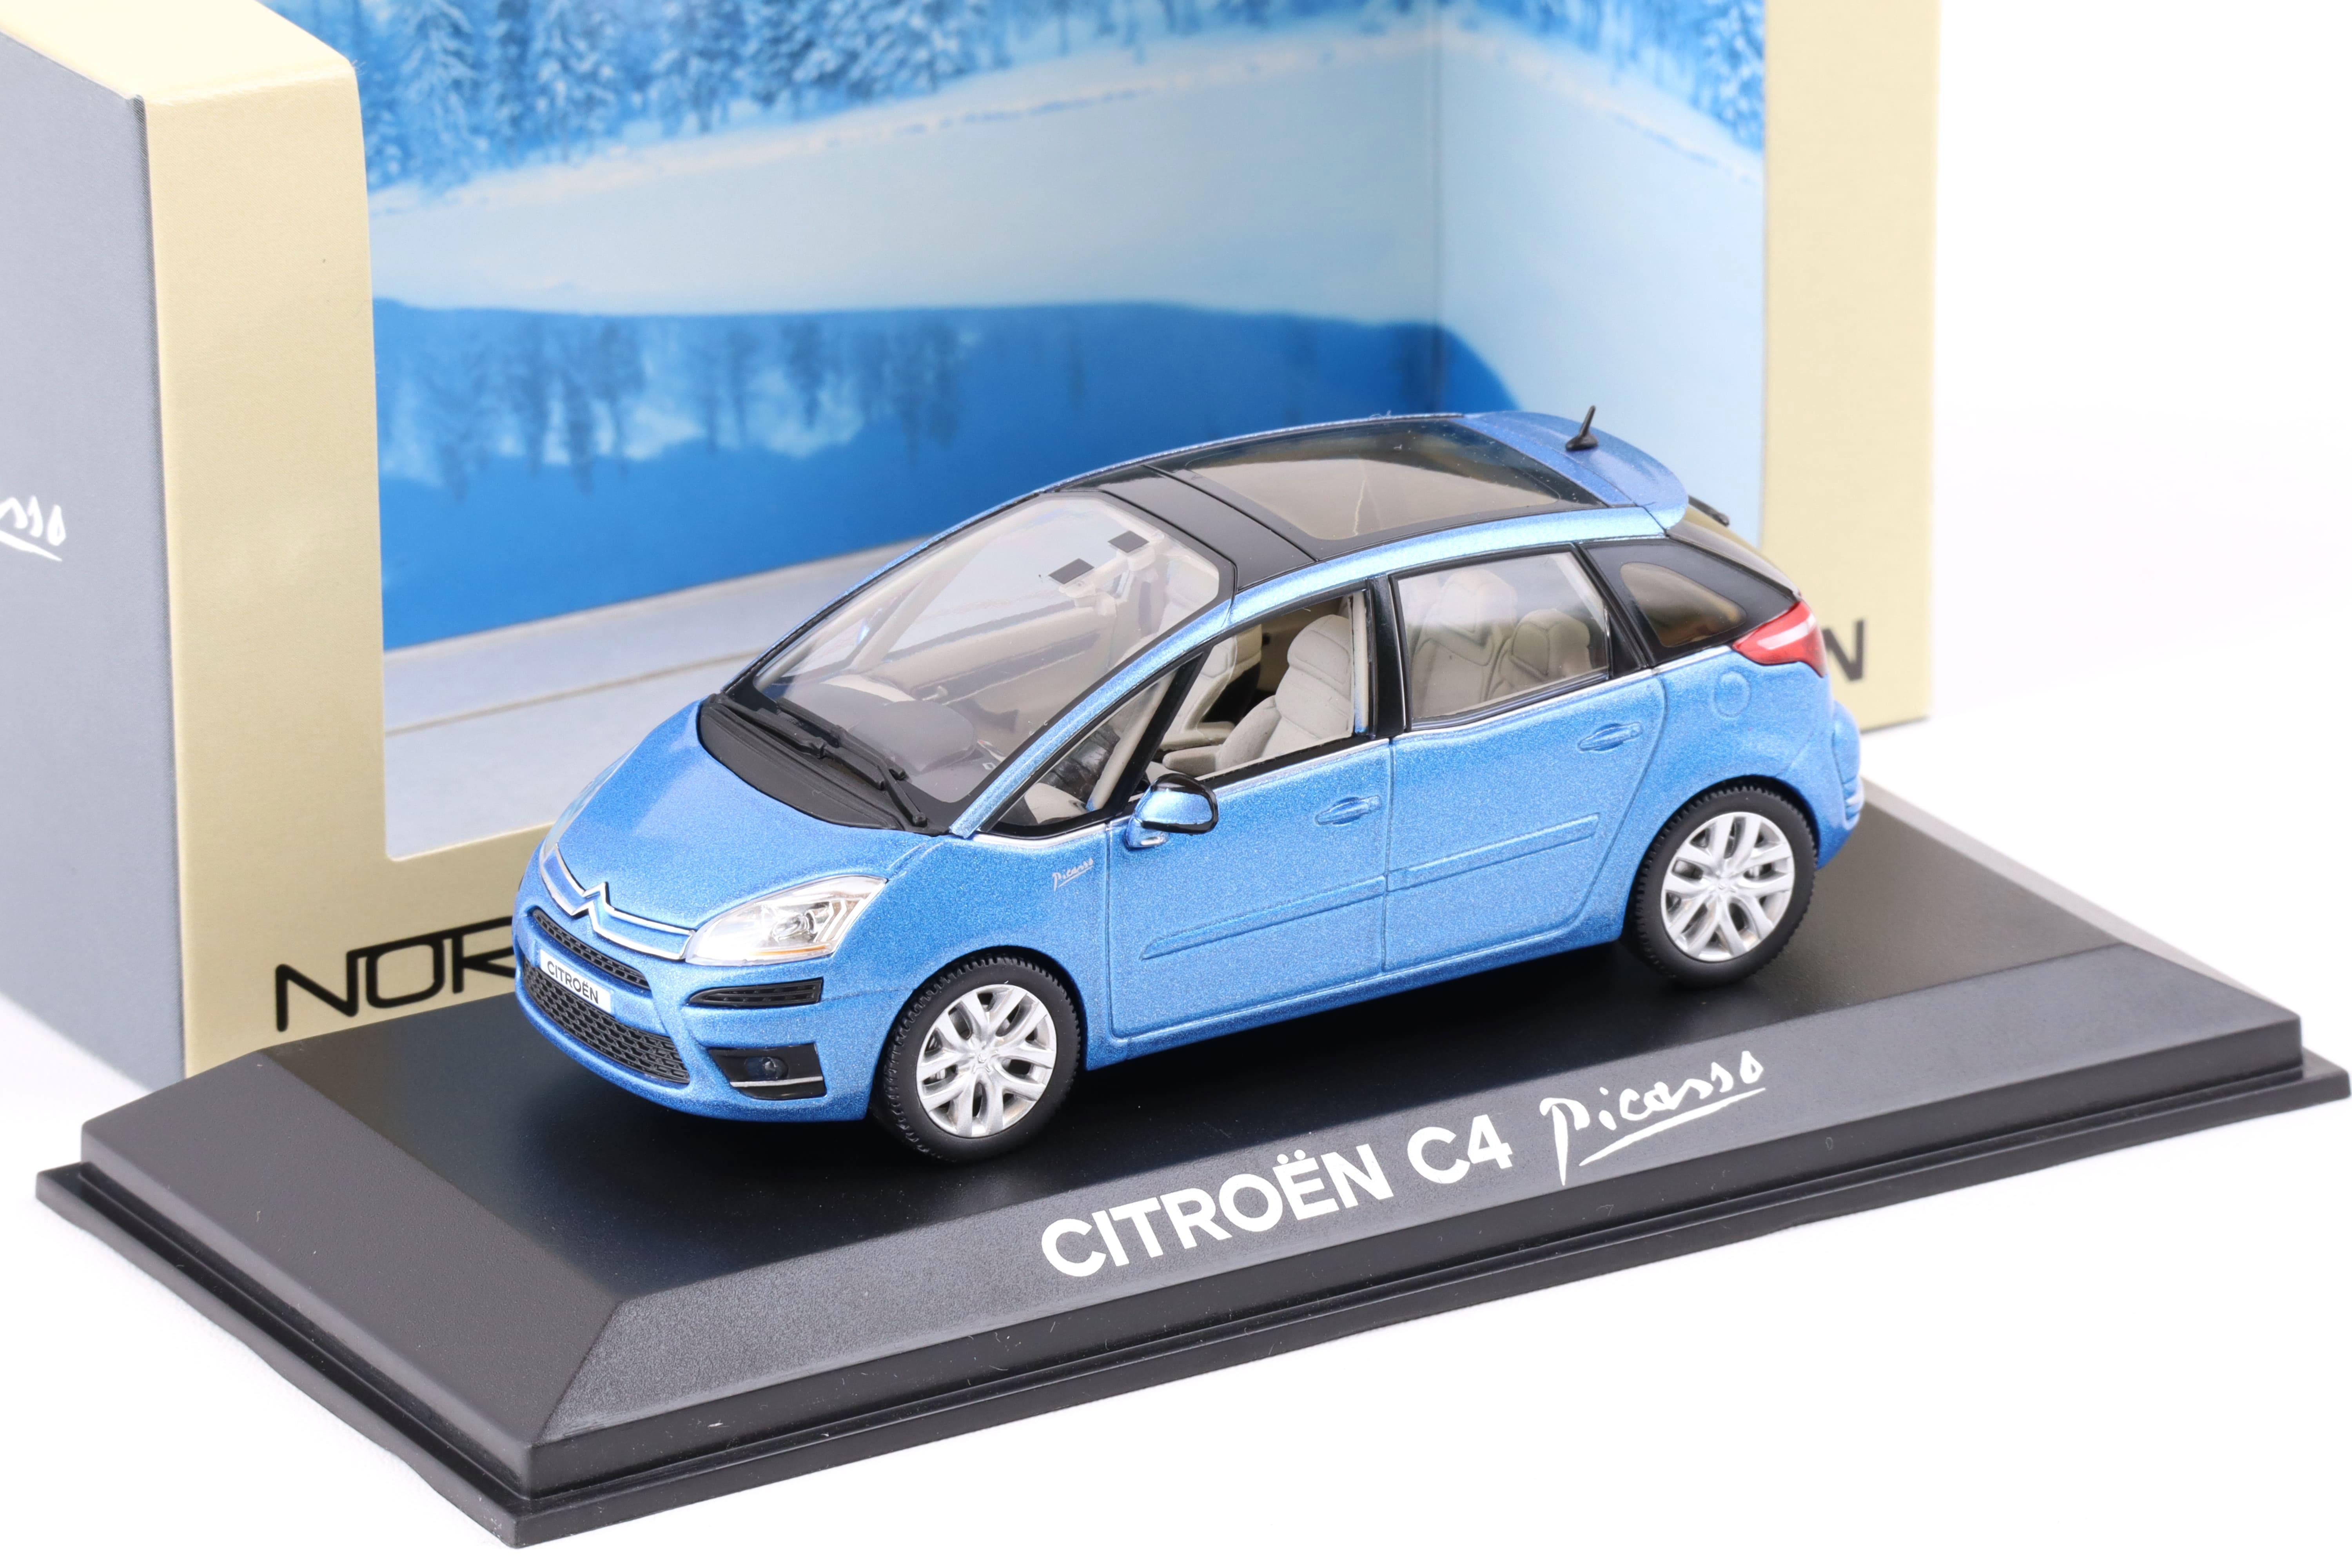 1:43 Norev Citroen C4 Picasso 2007 with glass roof blue metallic